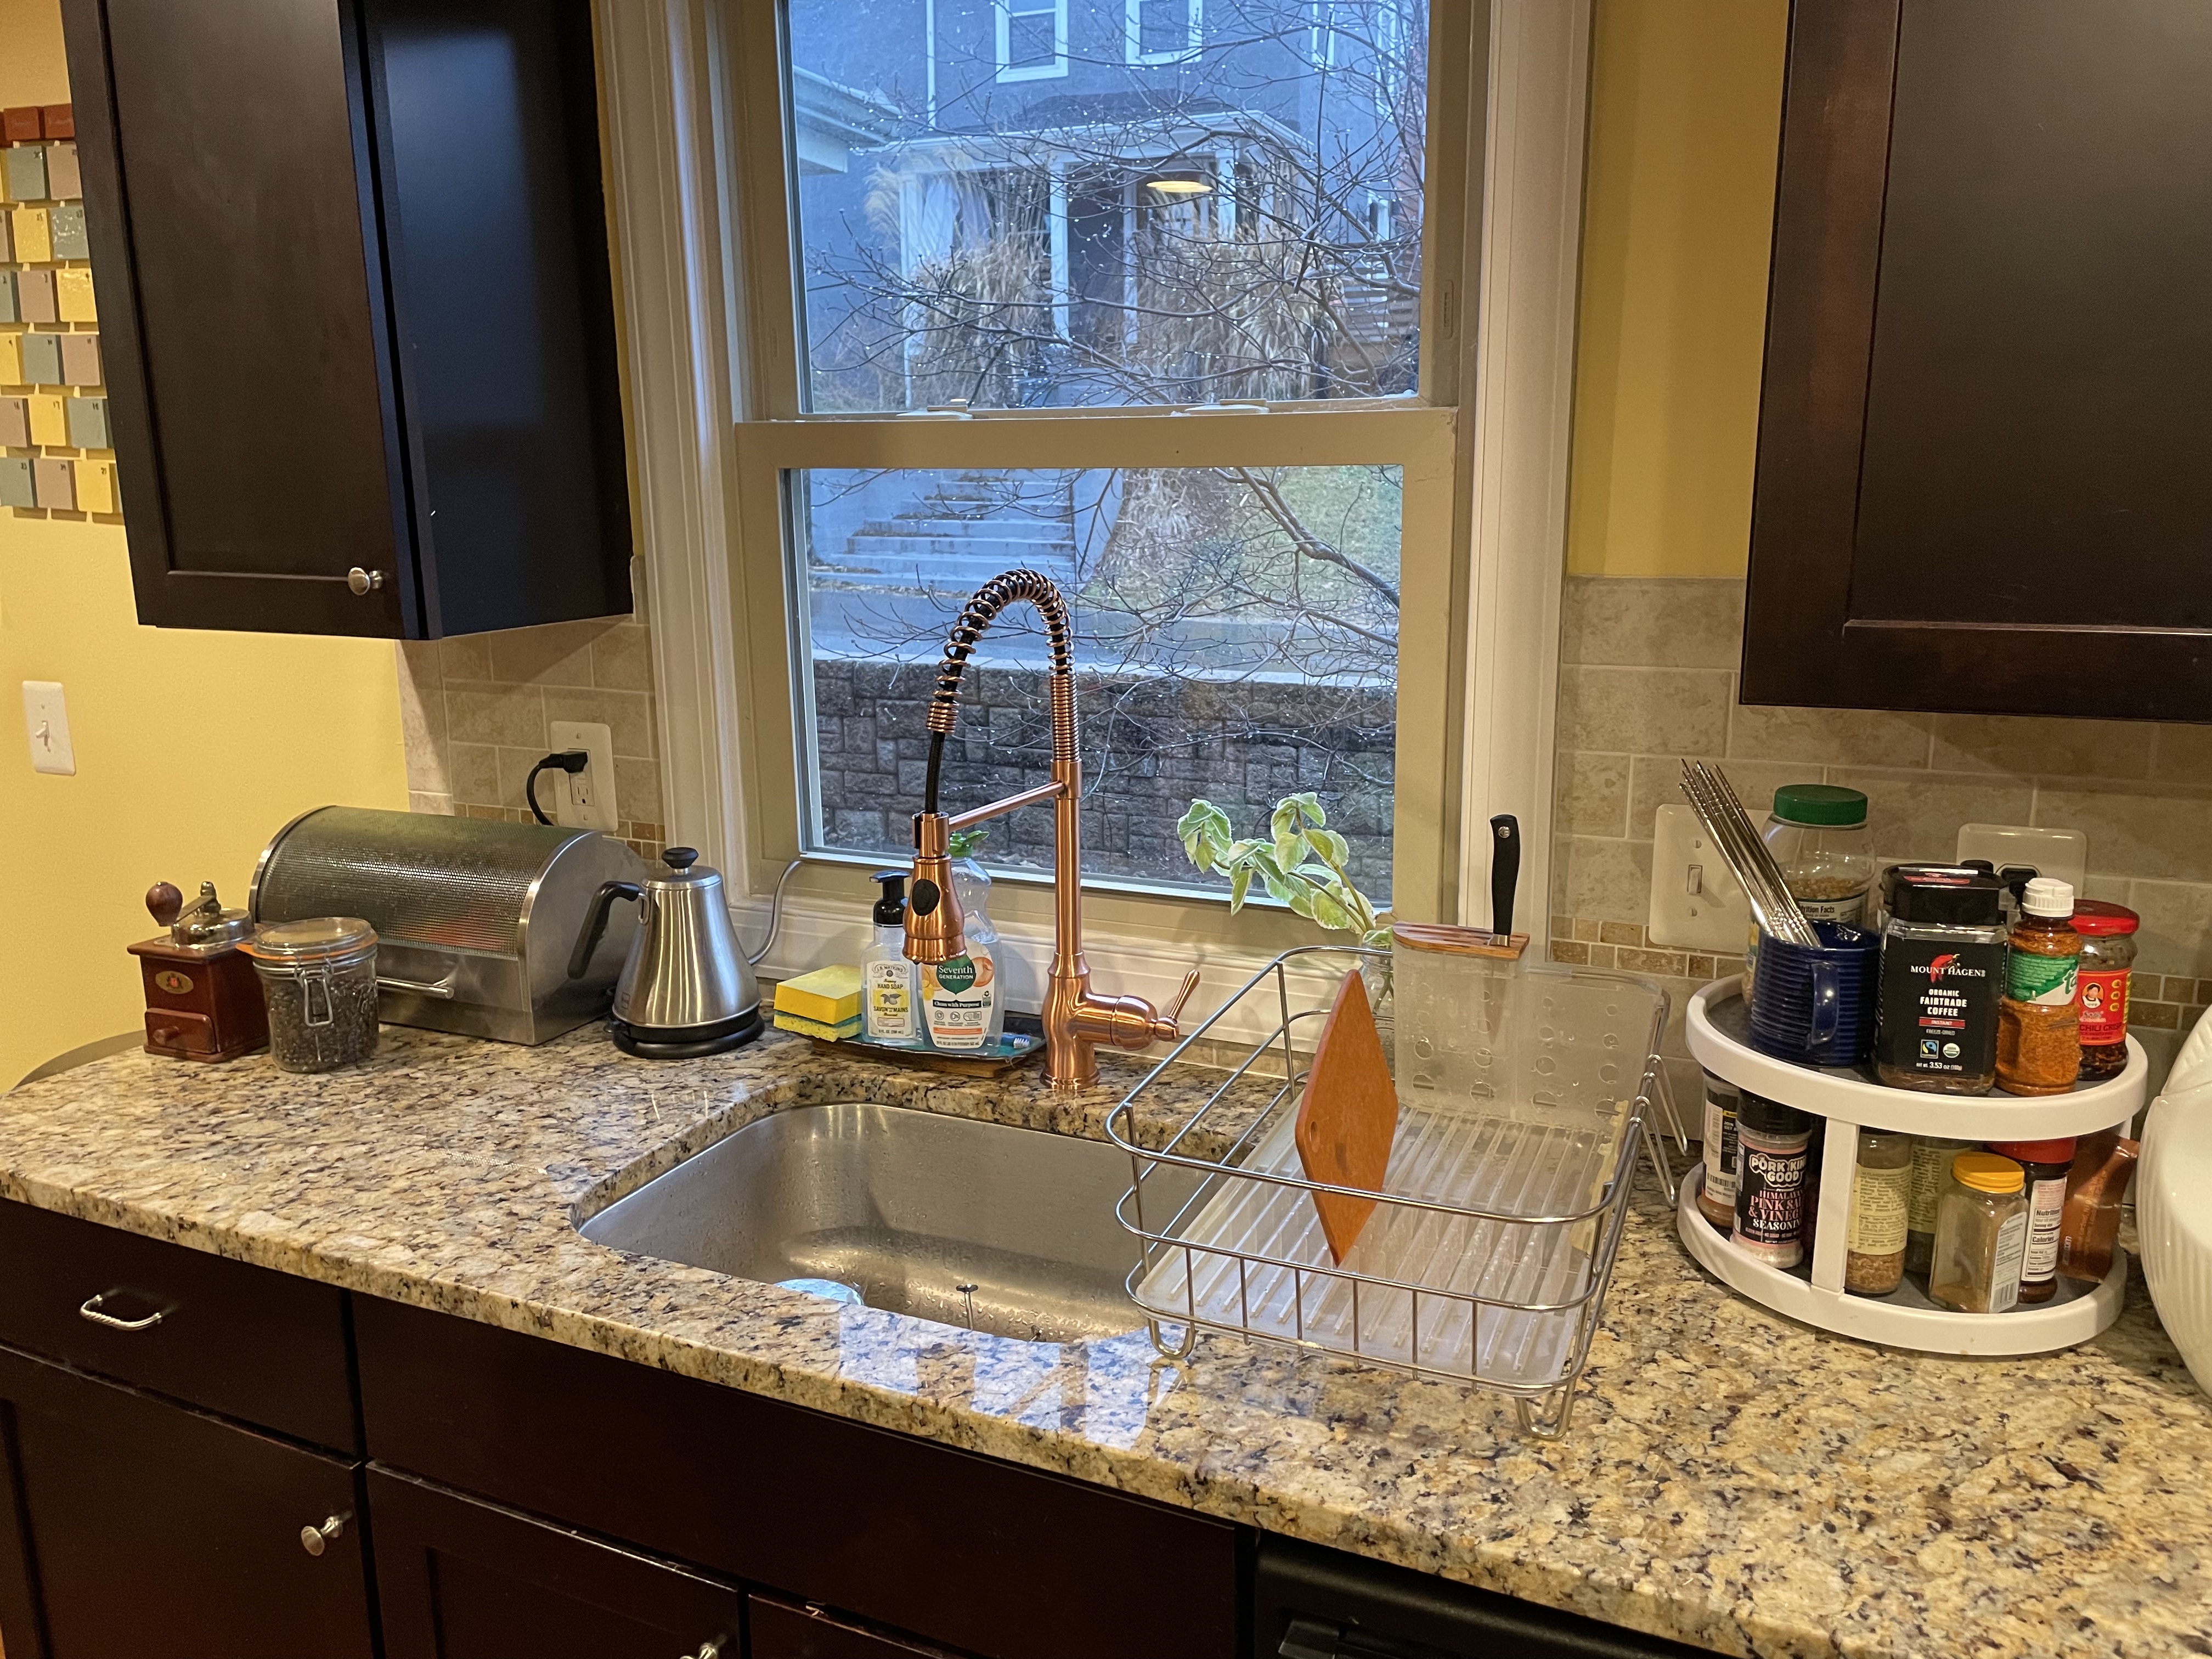 Kitchen counter after, with a pro-style copper faucet and less clutter